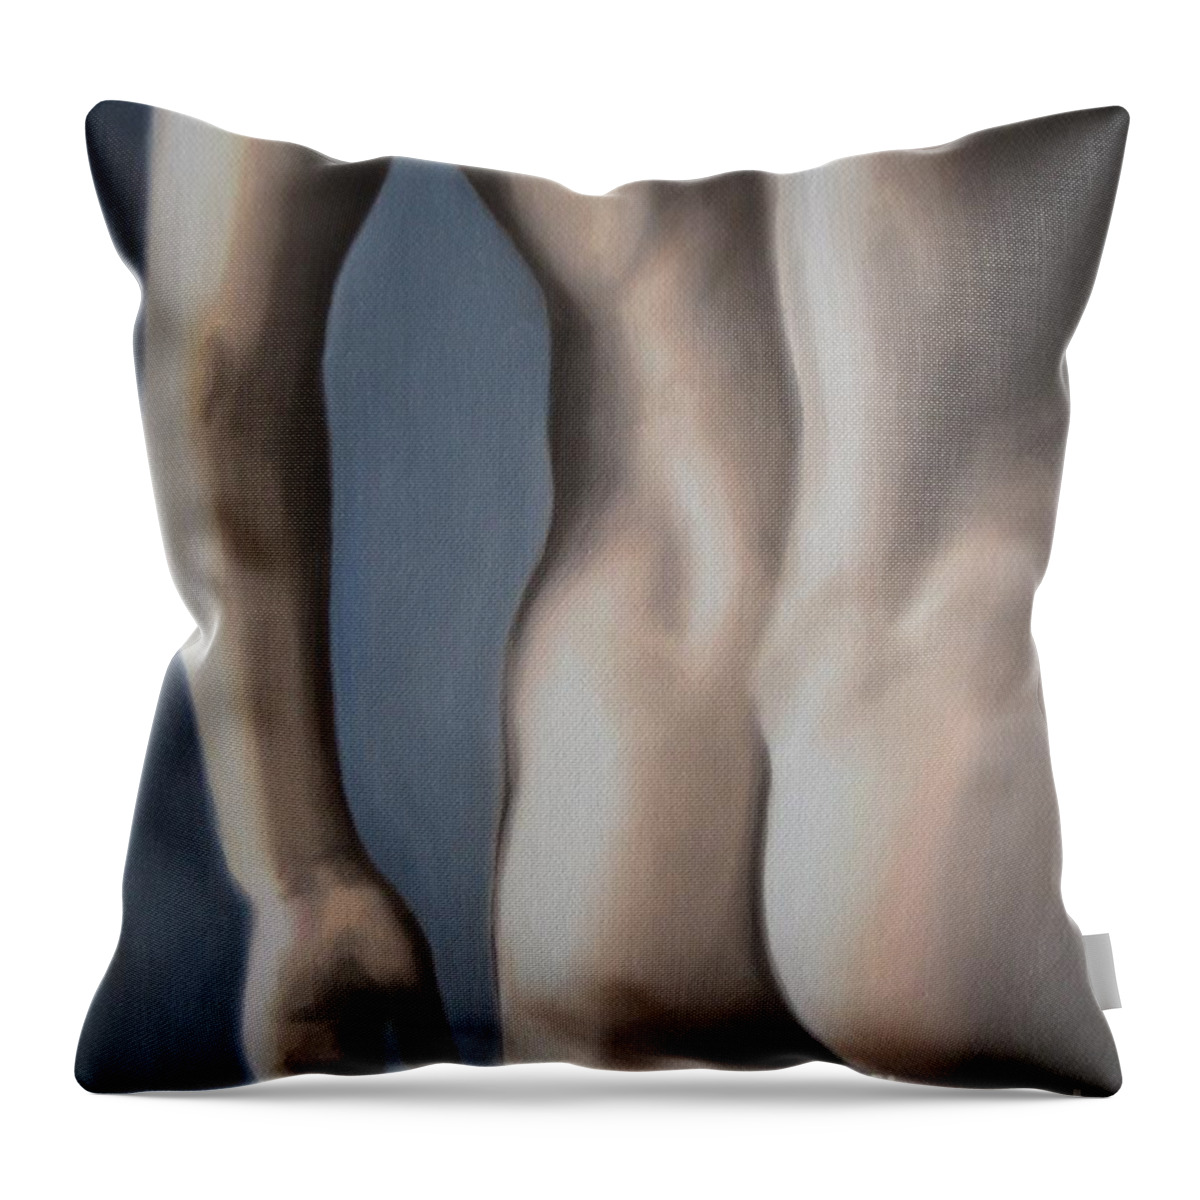 Noewi Throw Pillow featuring the painting Hot Buns by Jindra Noewi